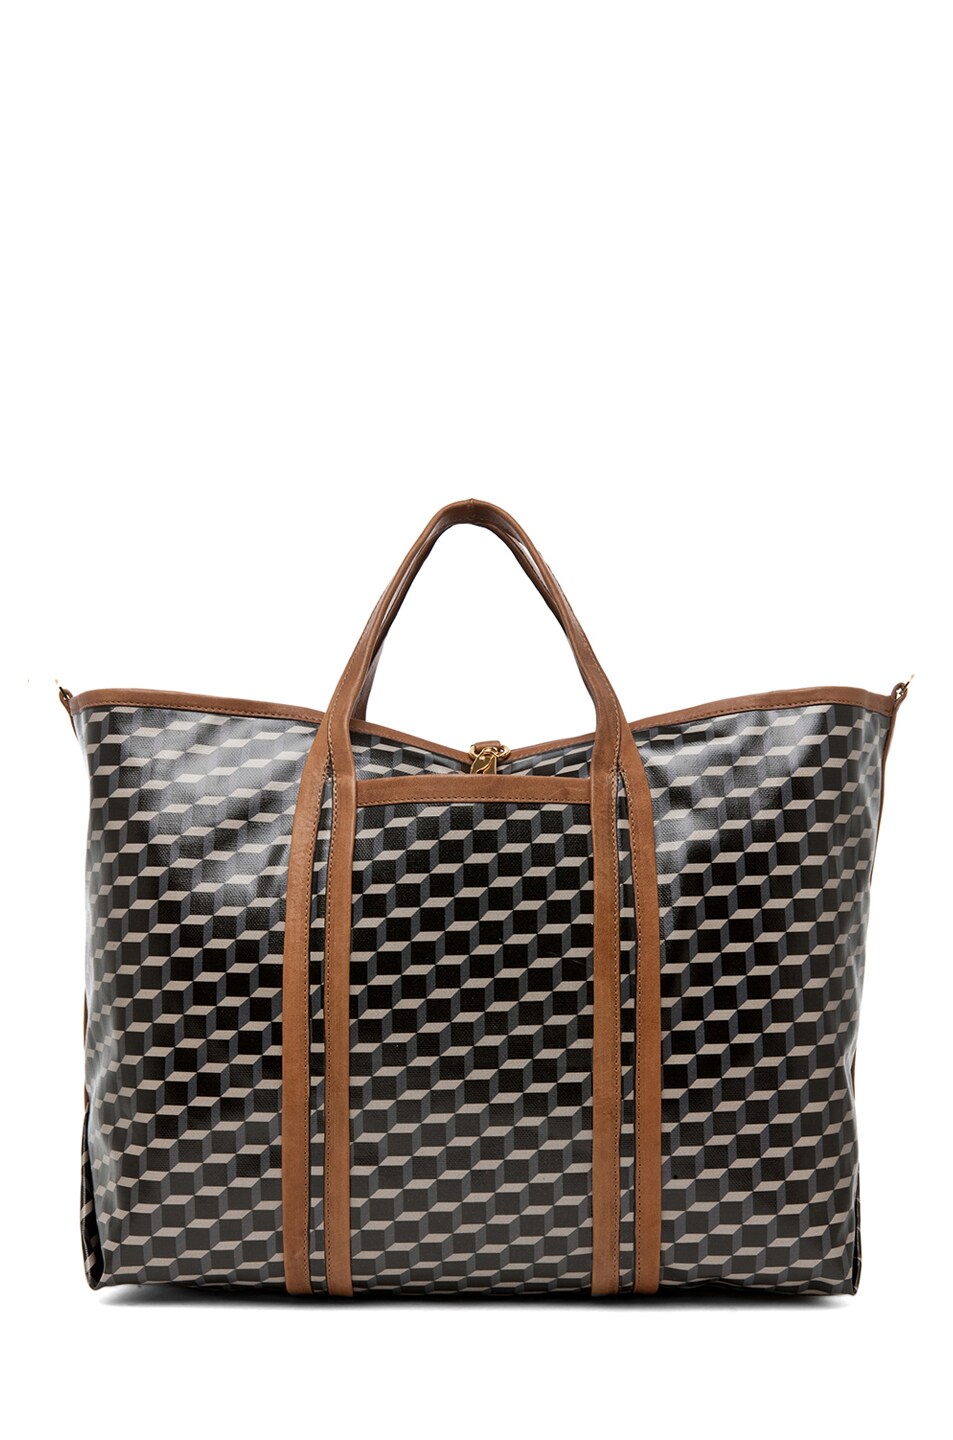 Pierre Hardy Cube Leather Bag in Grey & Natural | FWRD